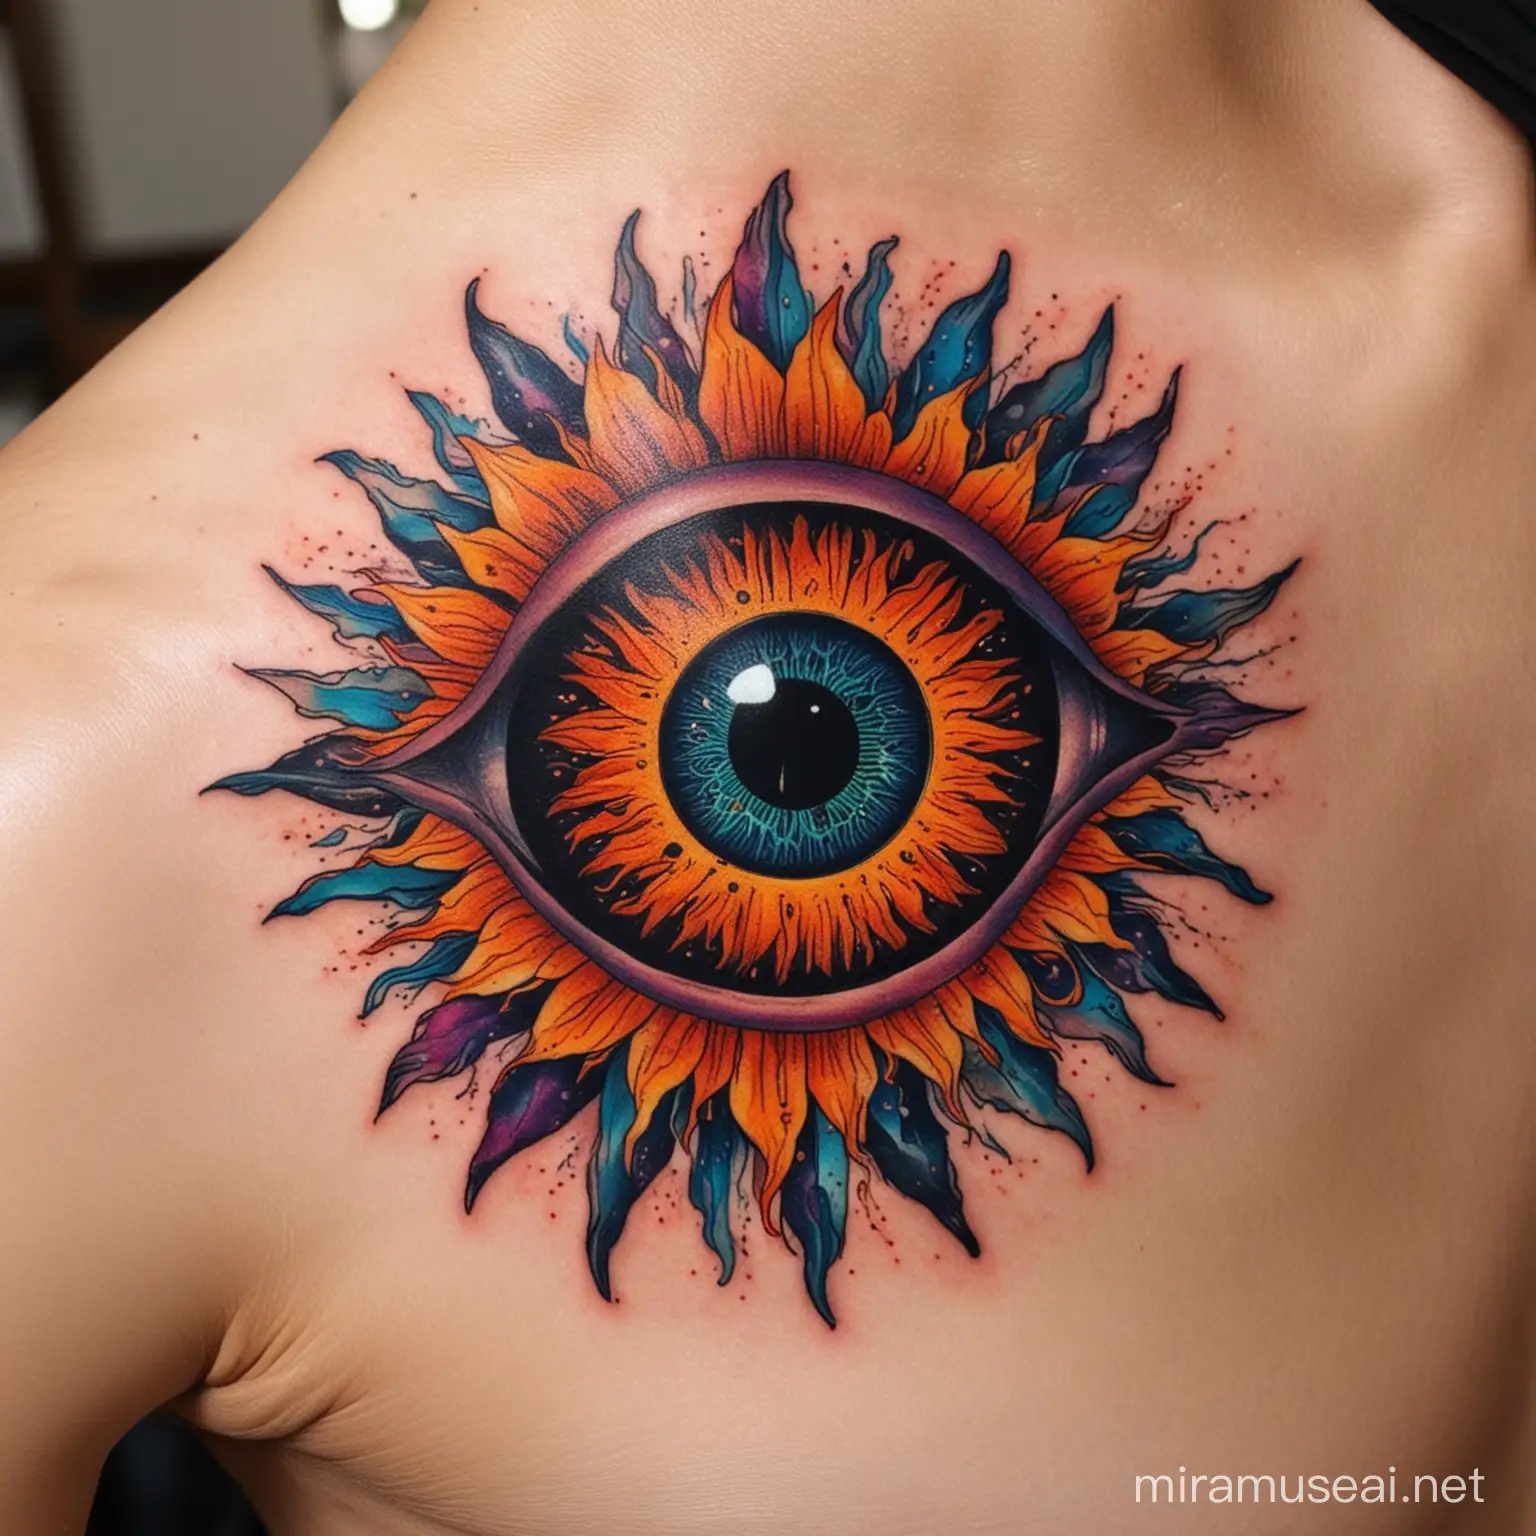 Intricate Sun Eye Tattoo Vibrant Psychedelic Art on Biceps